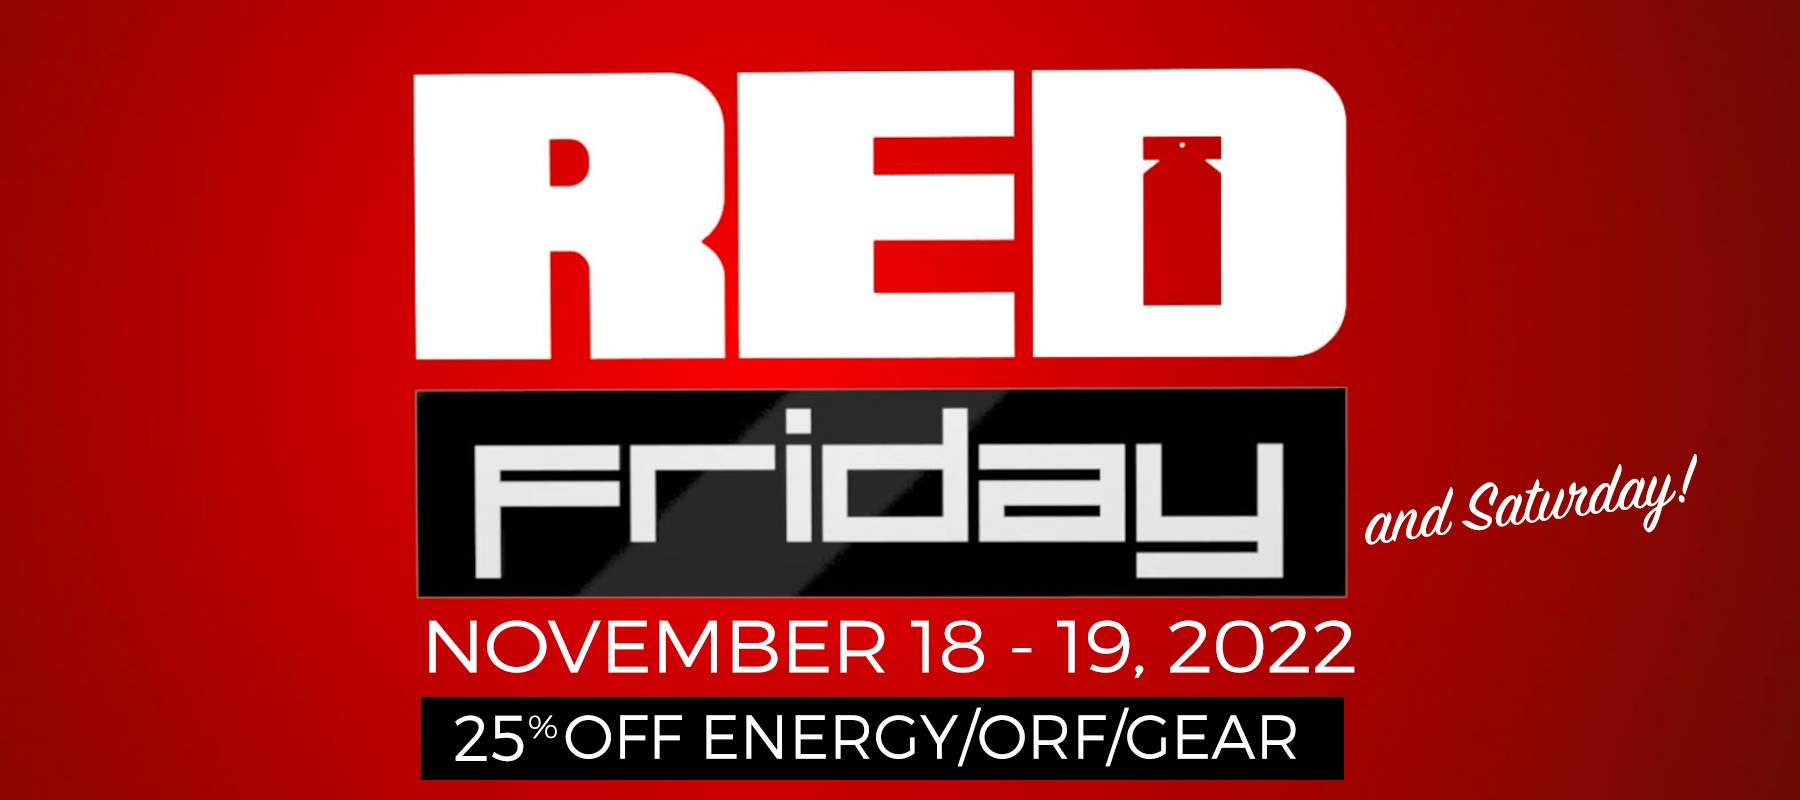 RED FRIDAY